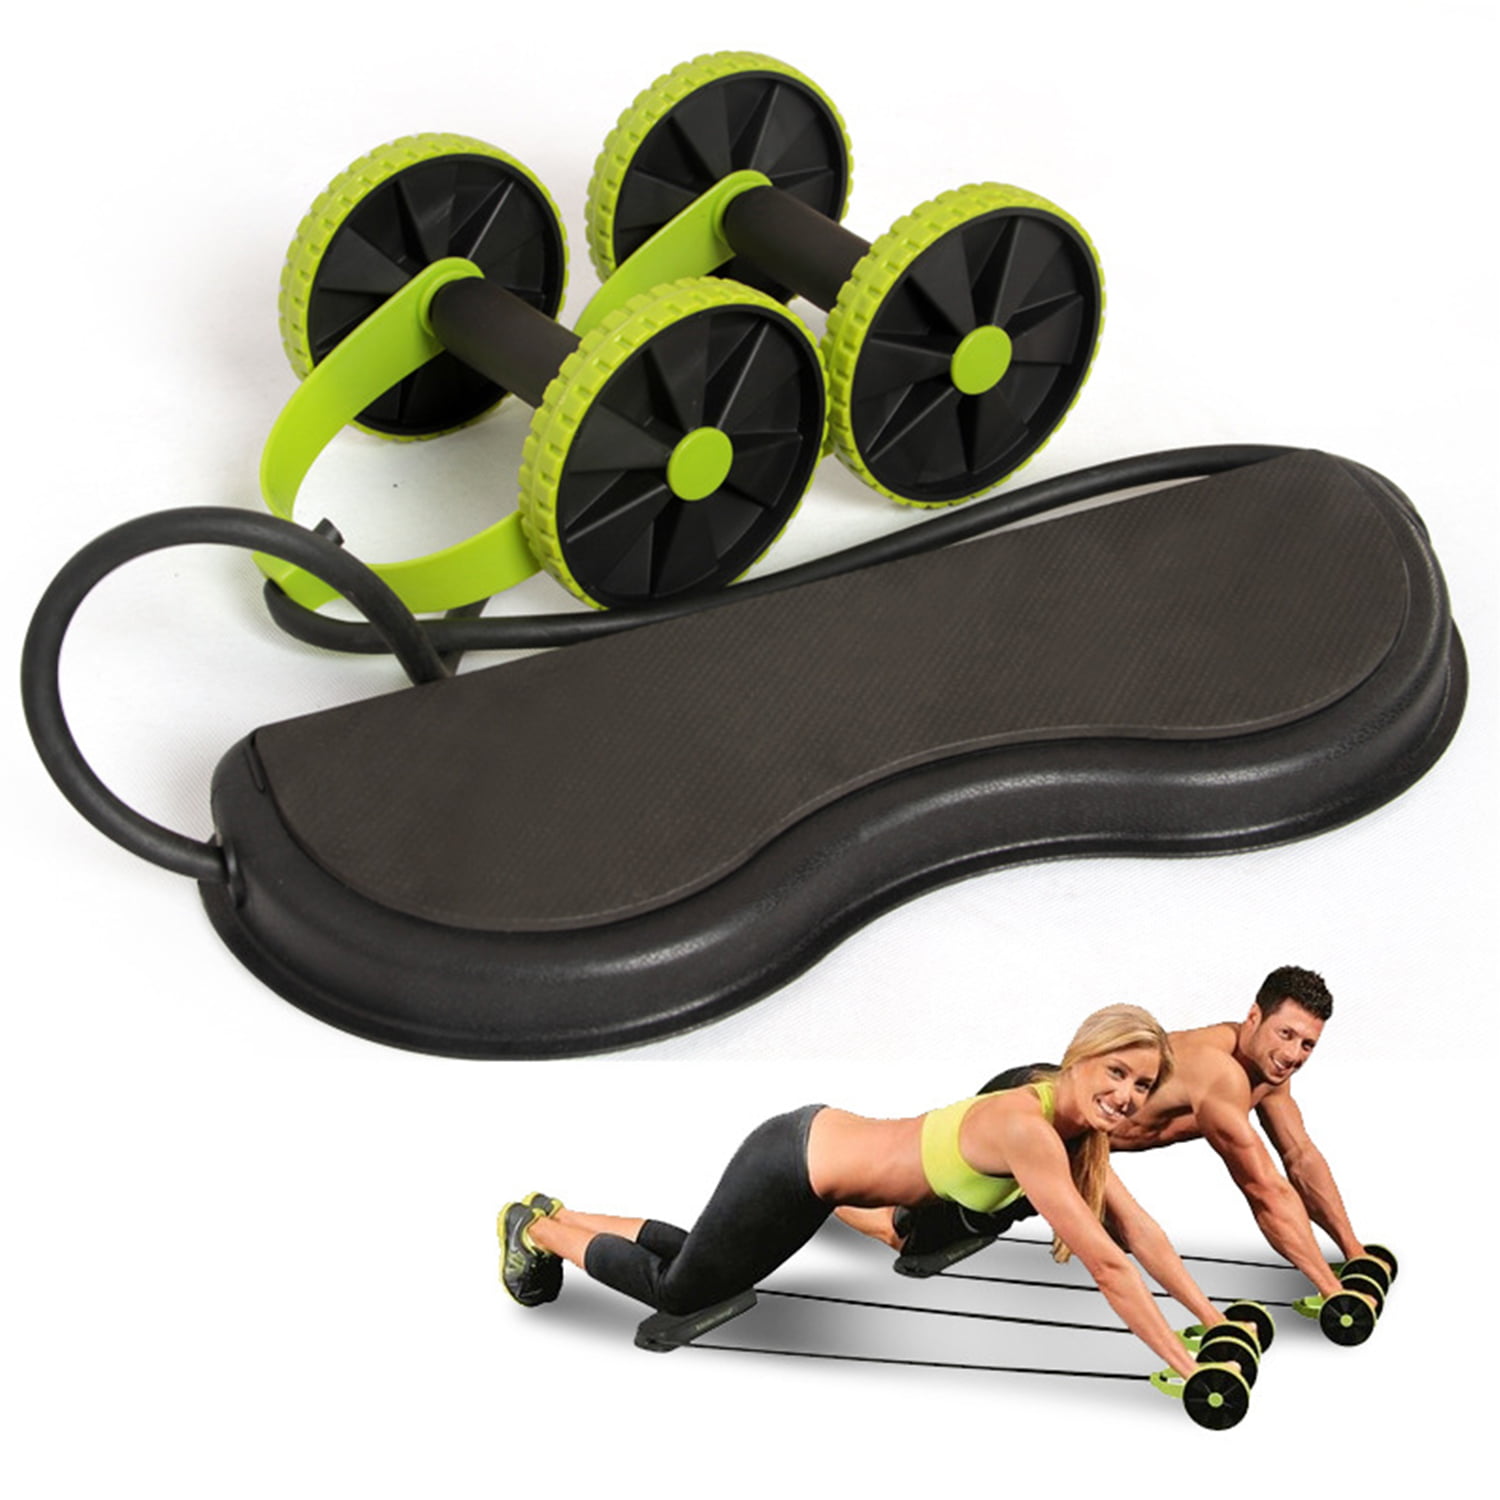 Details about   Fitness Abdominal Wheel Roller Ab Musle Training Exercise Workout Gym Equipment 